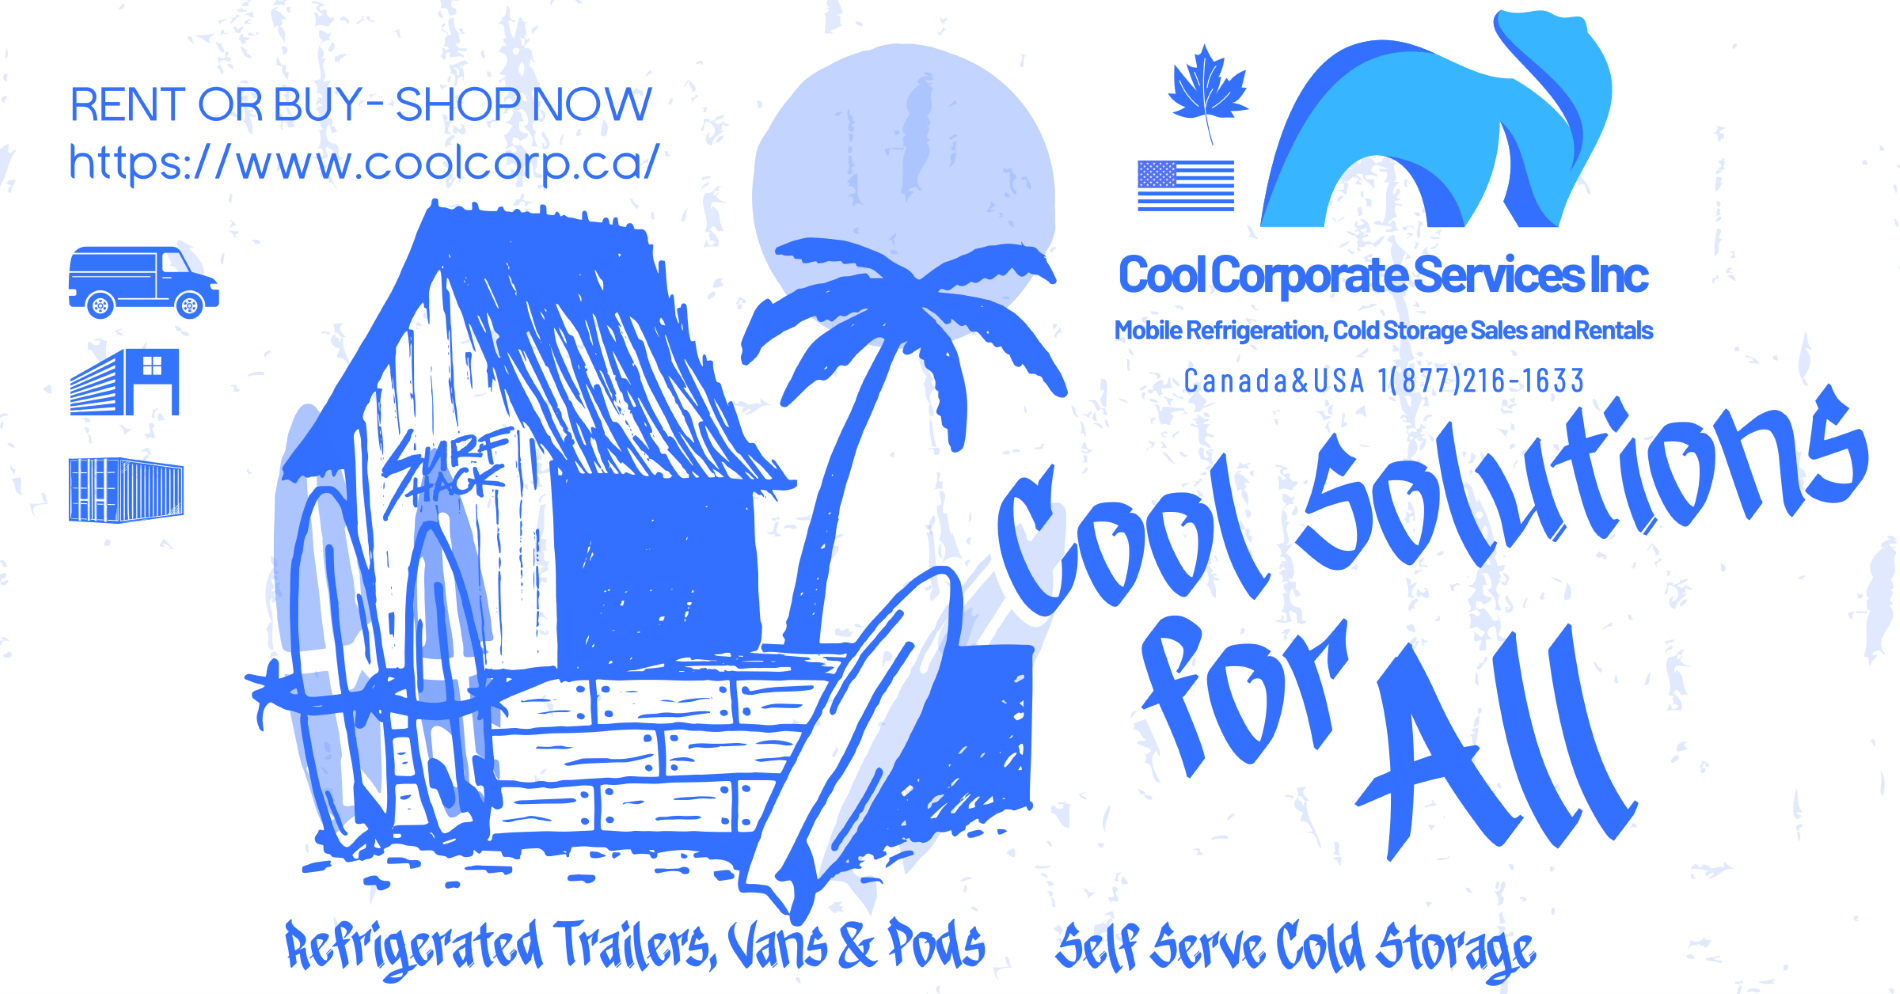 New Cooler Trailers and Pods For Sale